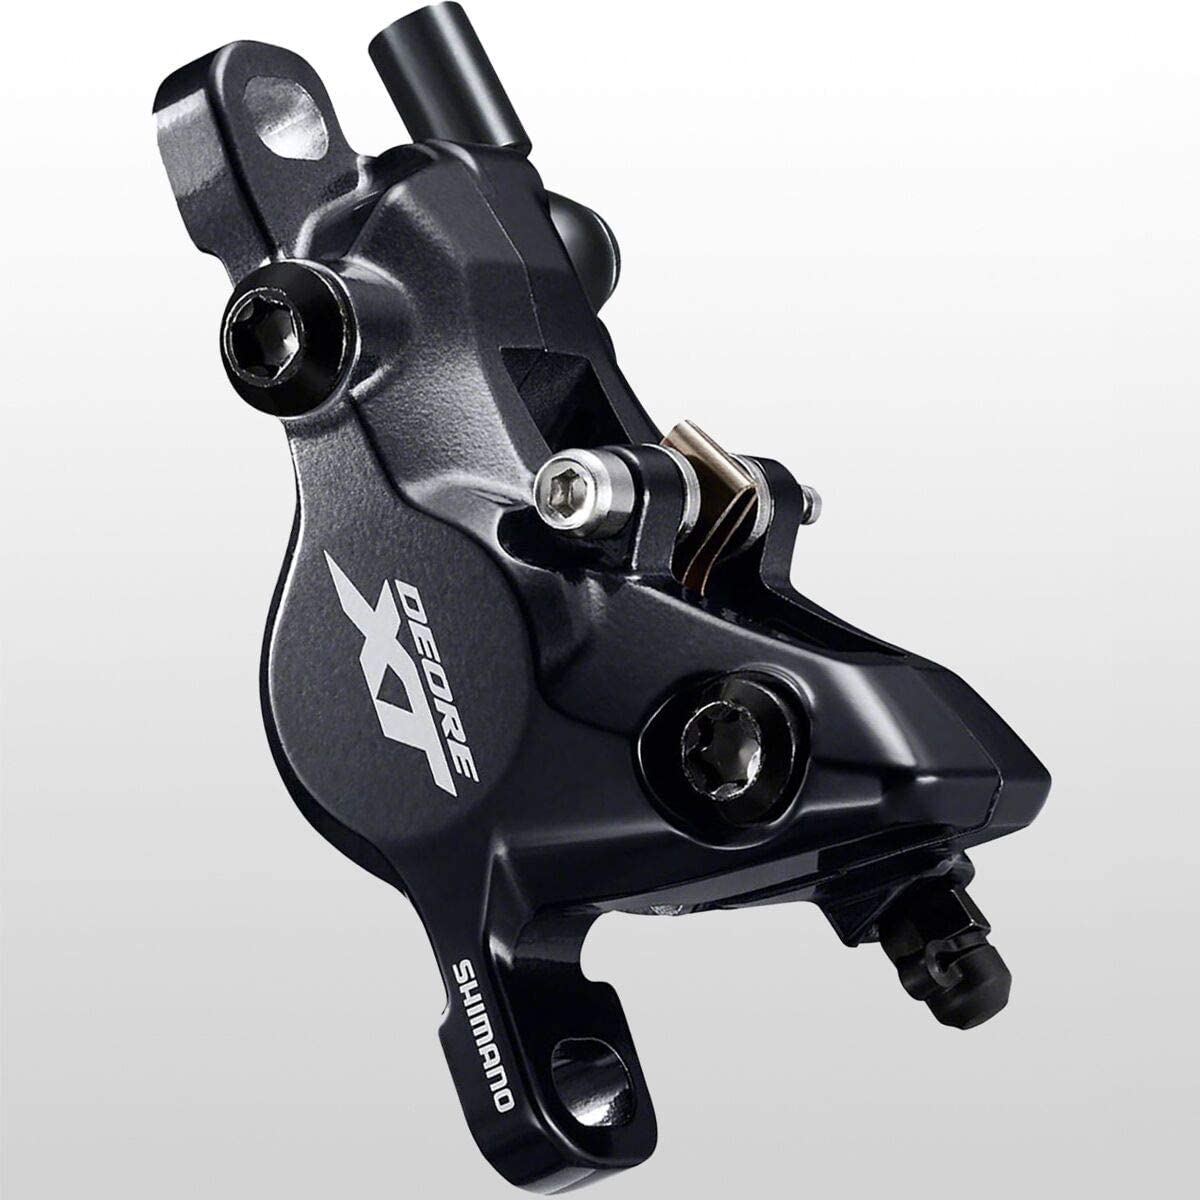 Shimano Deore XT BL-M8100/BR-M8100 Disc Brake and Lever Hydraulic Components Shimano Rear 